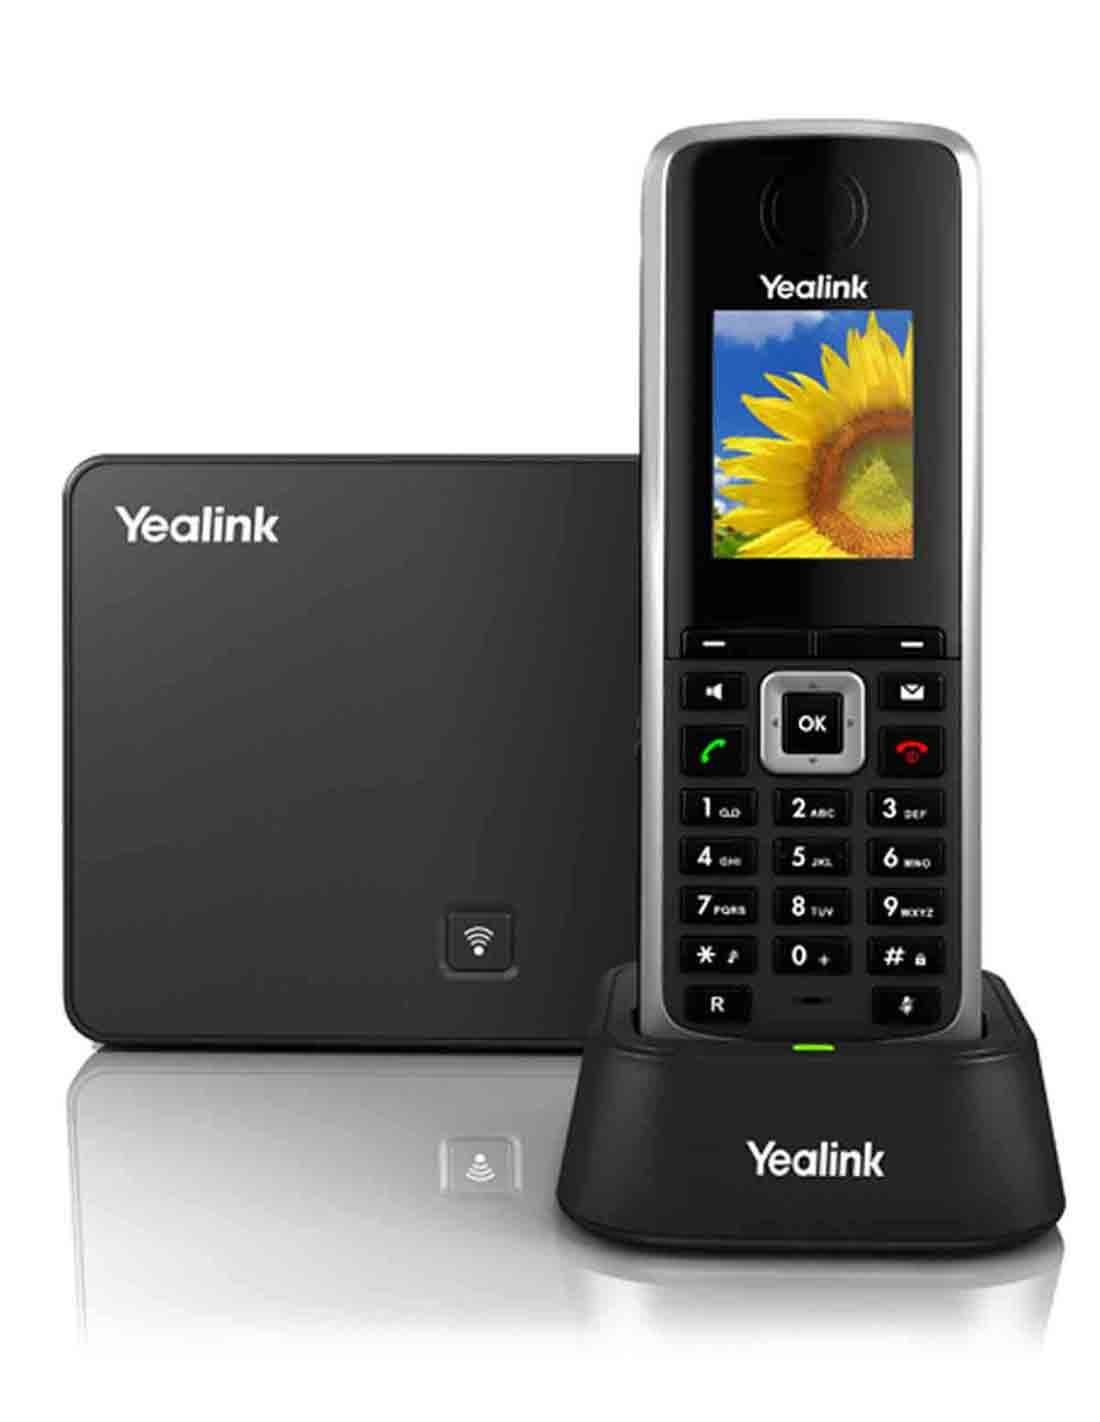 Yealink W52P IP DECT Phone at a Cheap Price in Dubai Online Store